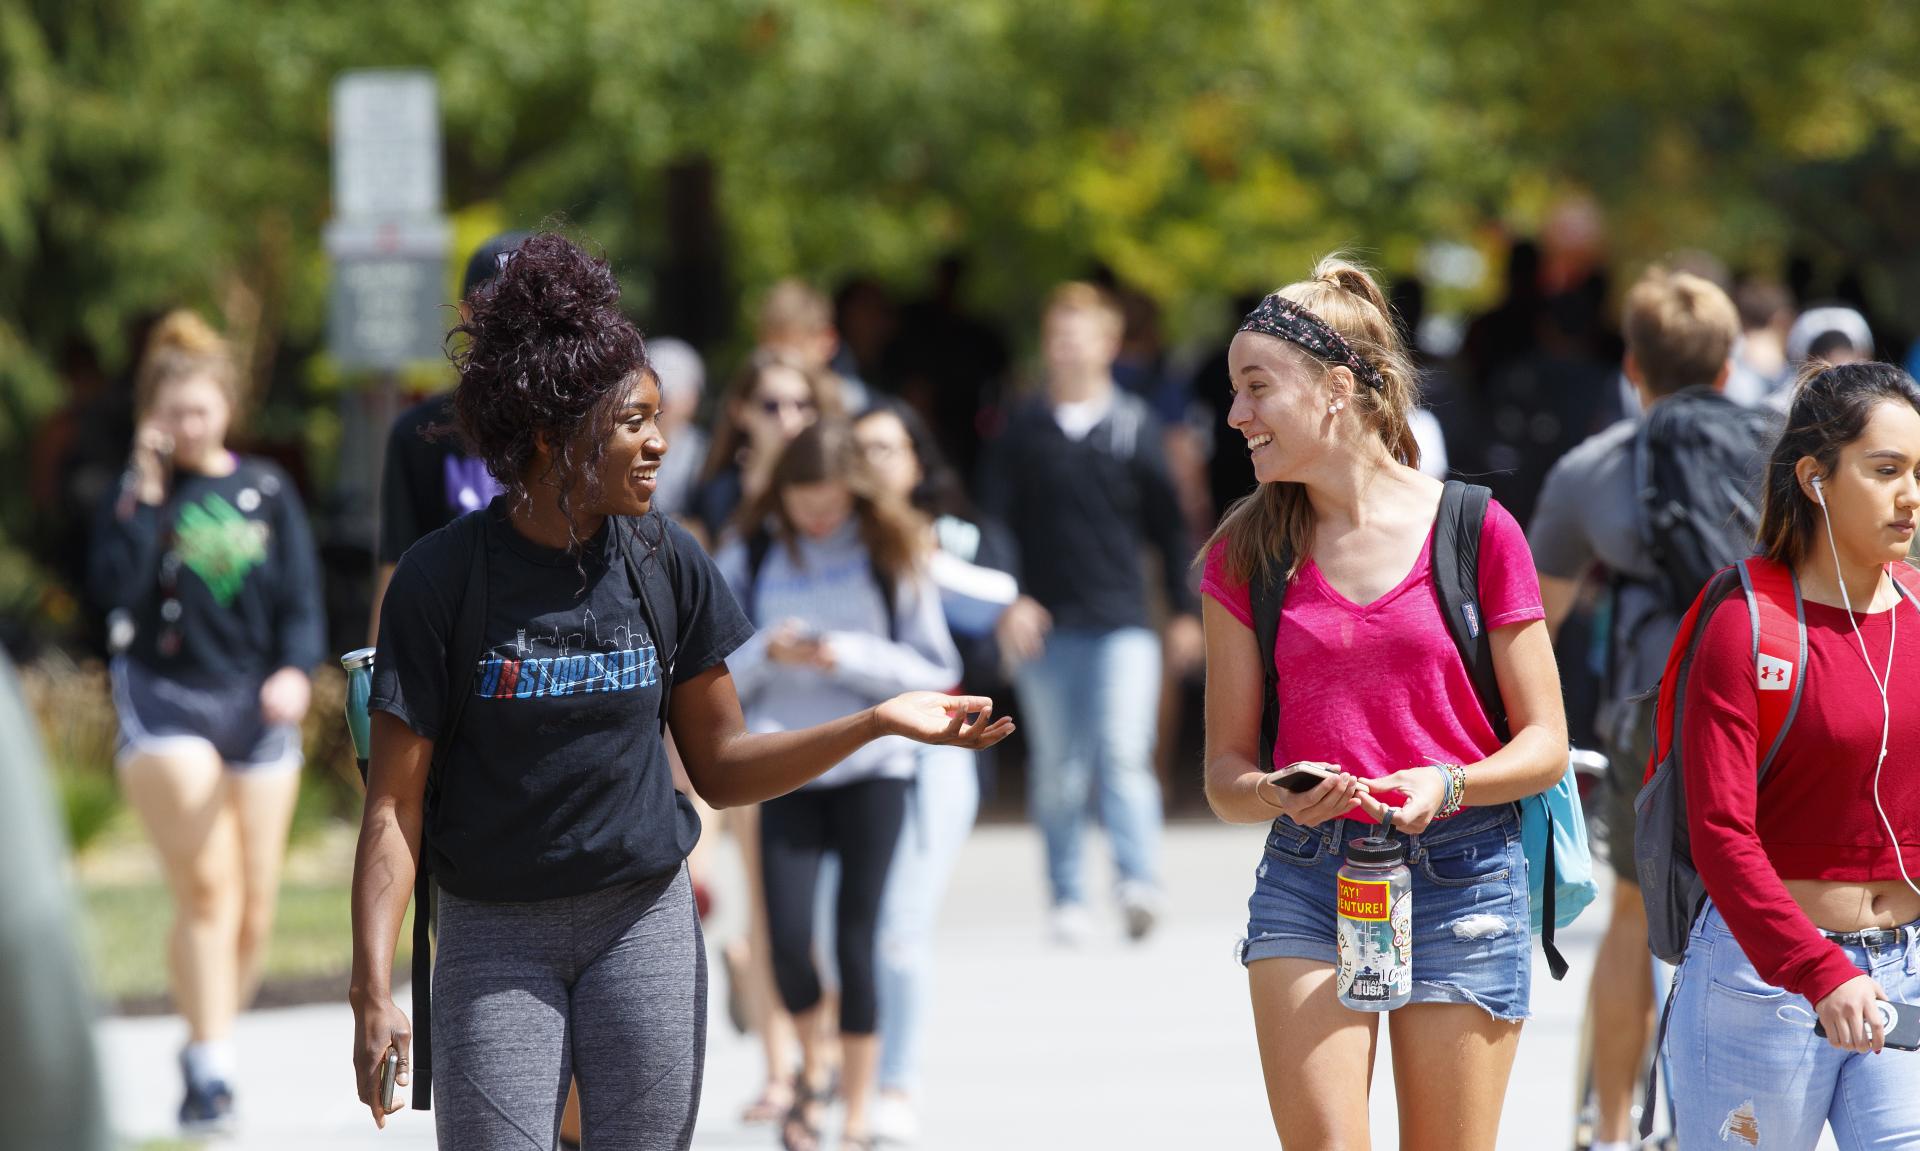 Students walking together on busy campus sidewalk